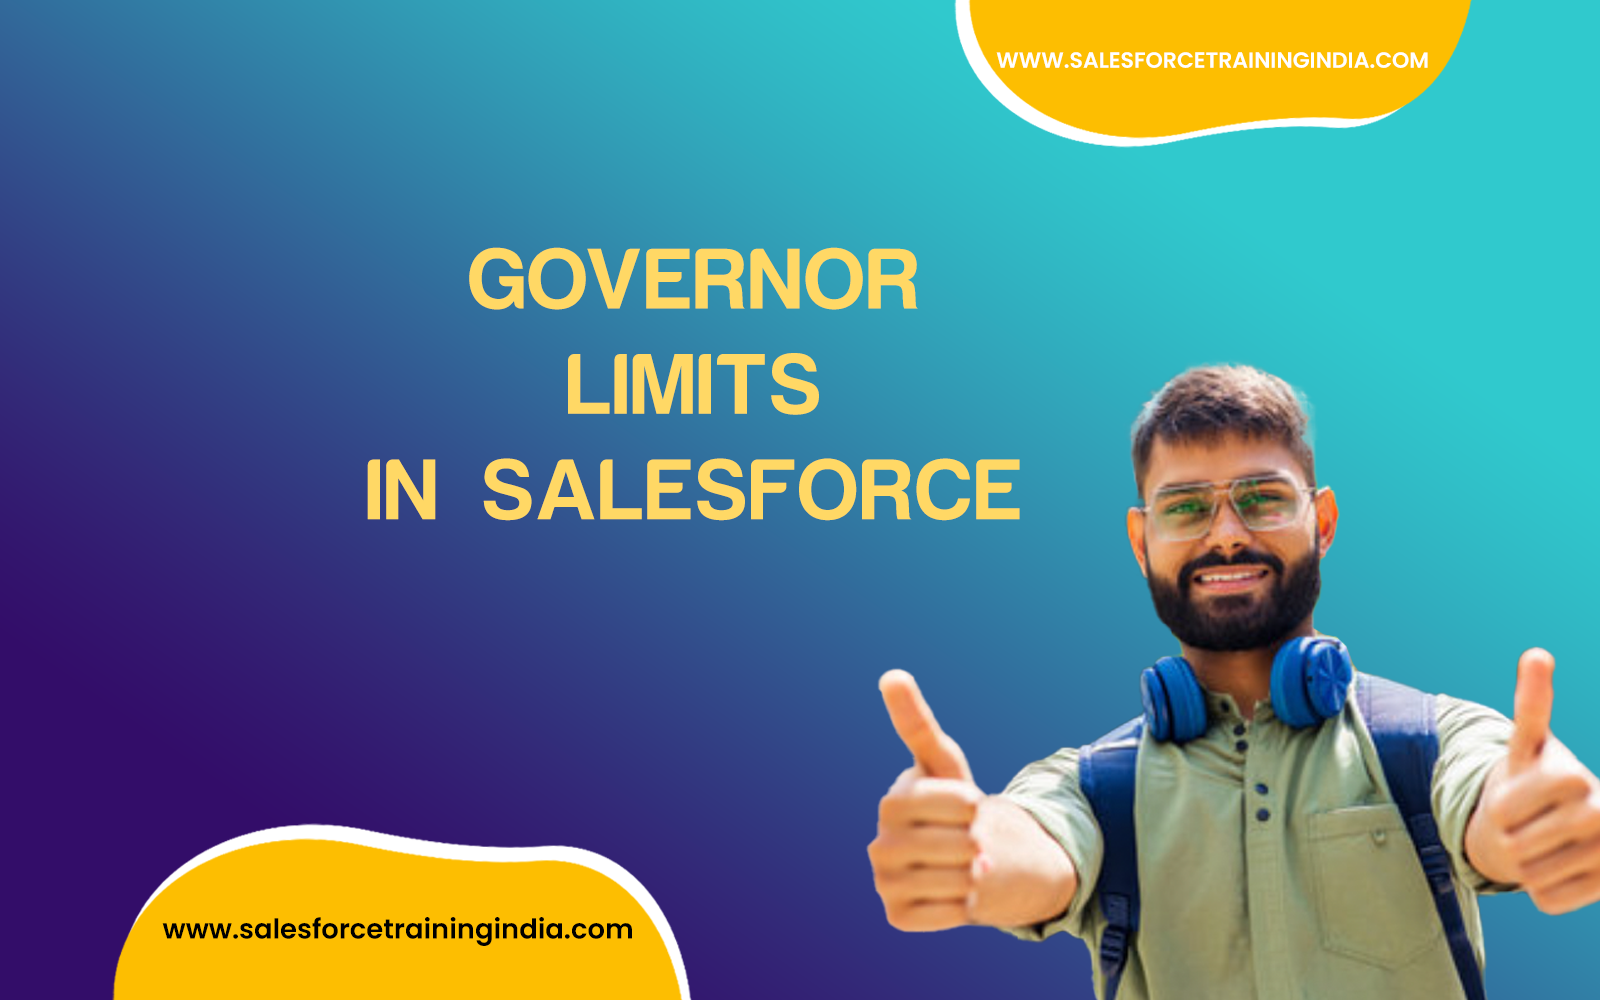 What are governor limits in Salesforce?